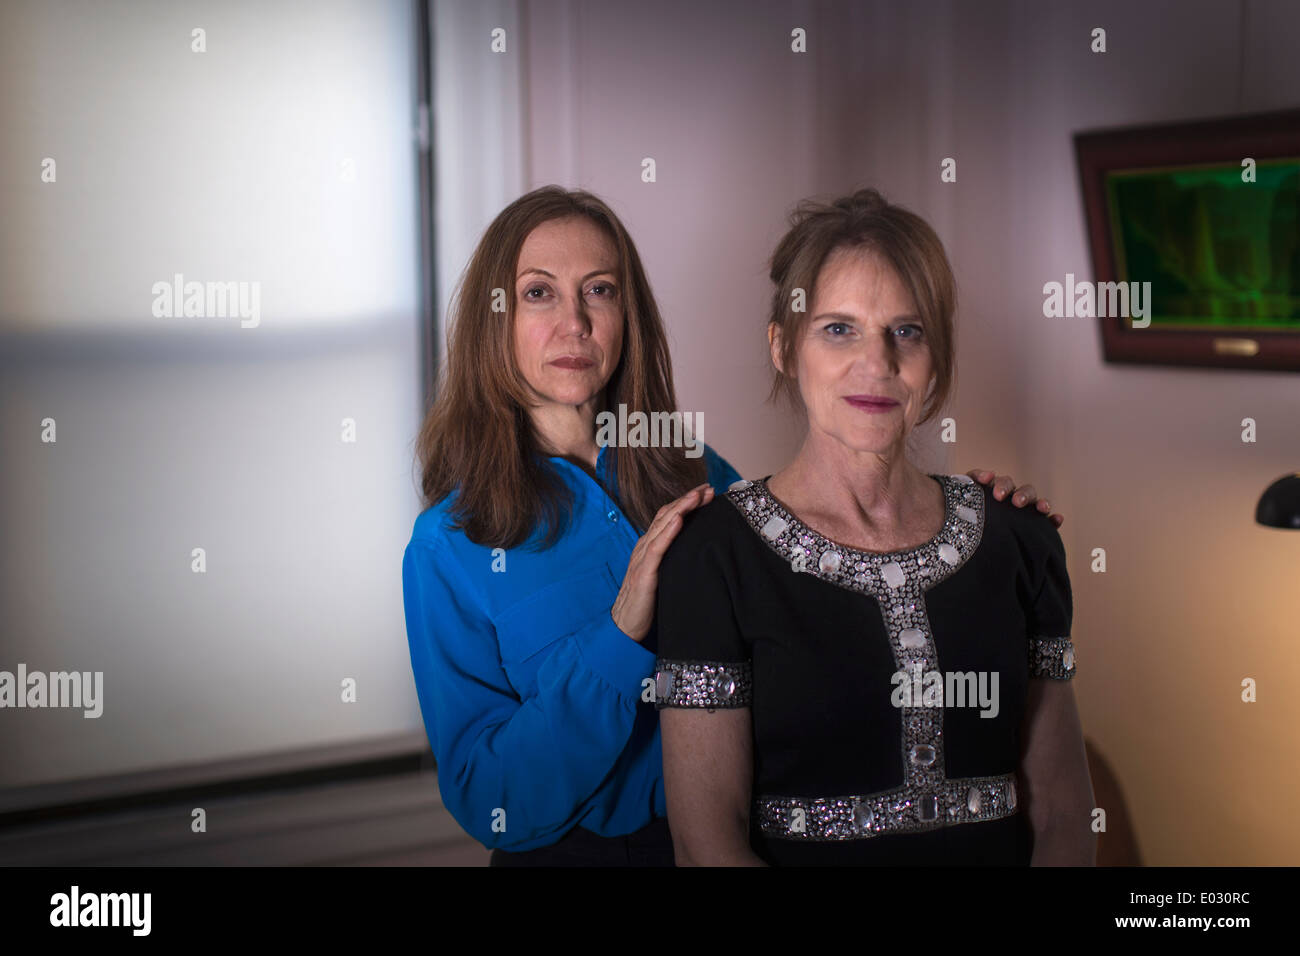 Two women standing one behind the other. Stock Photo